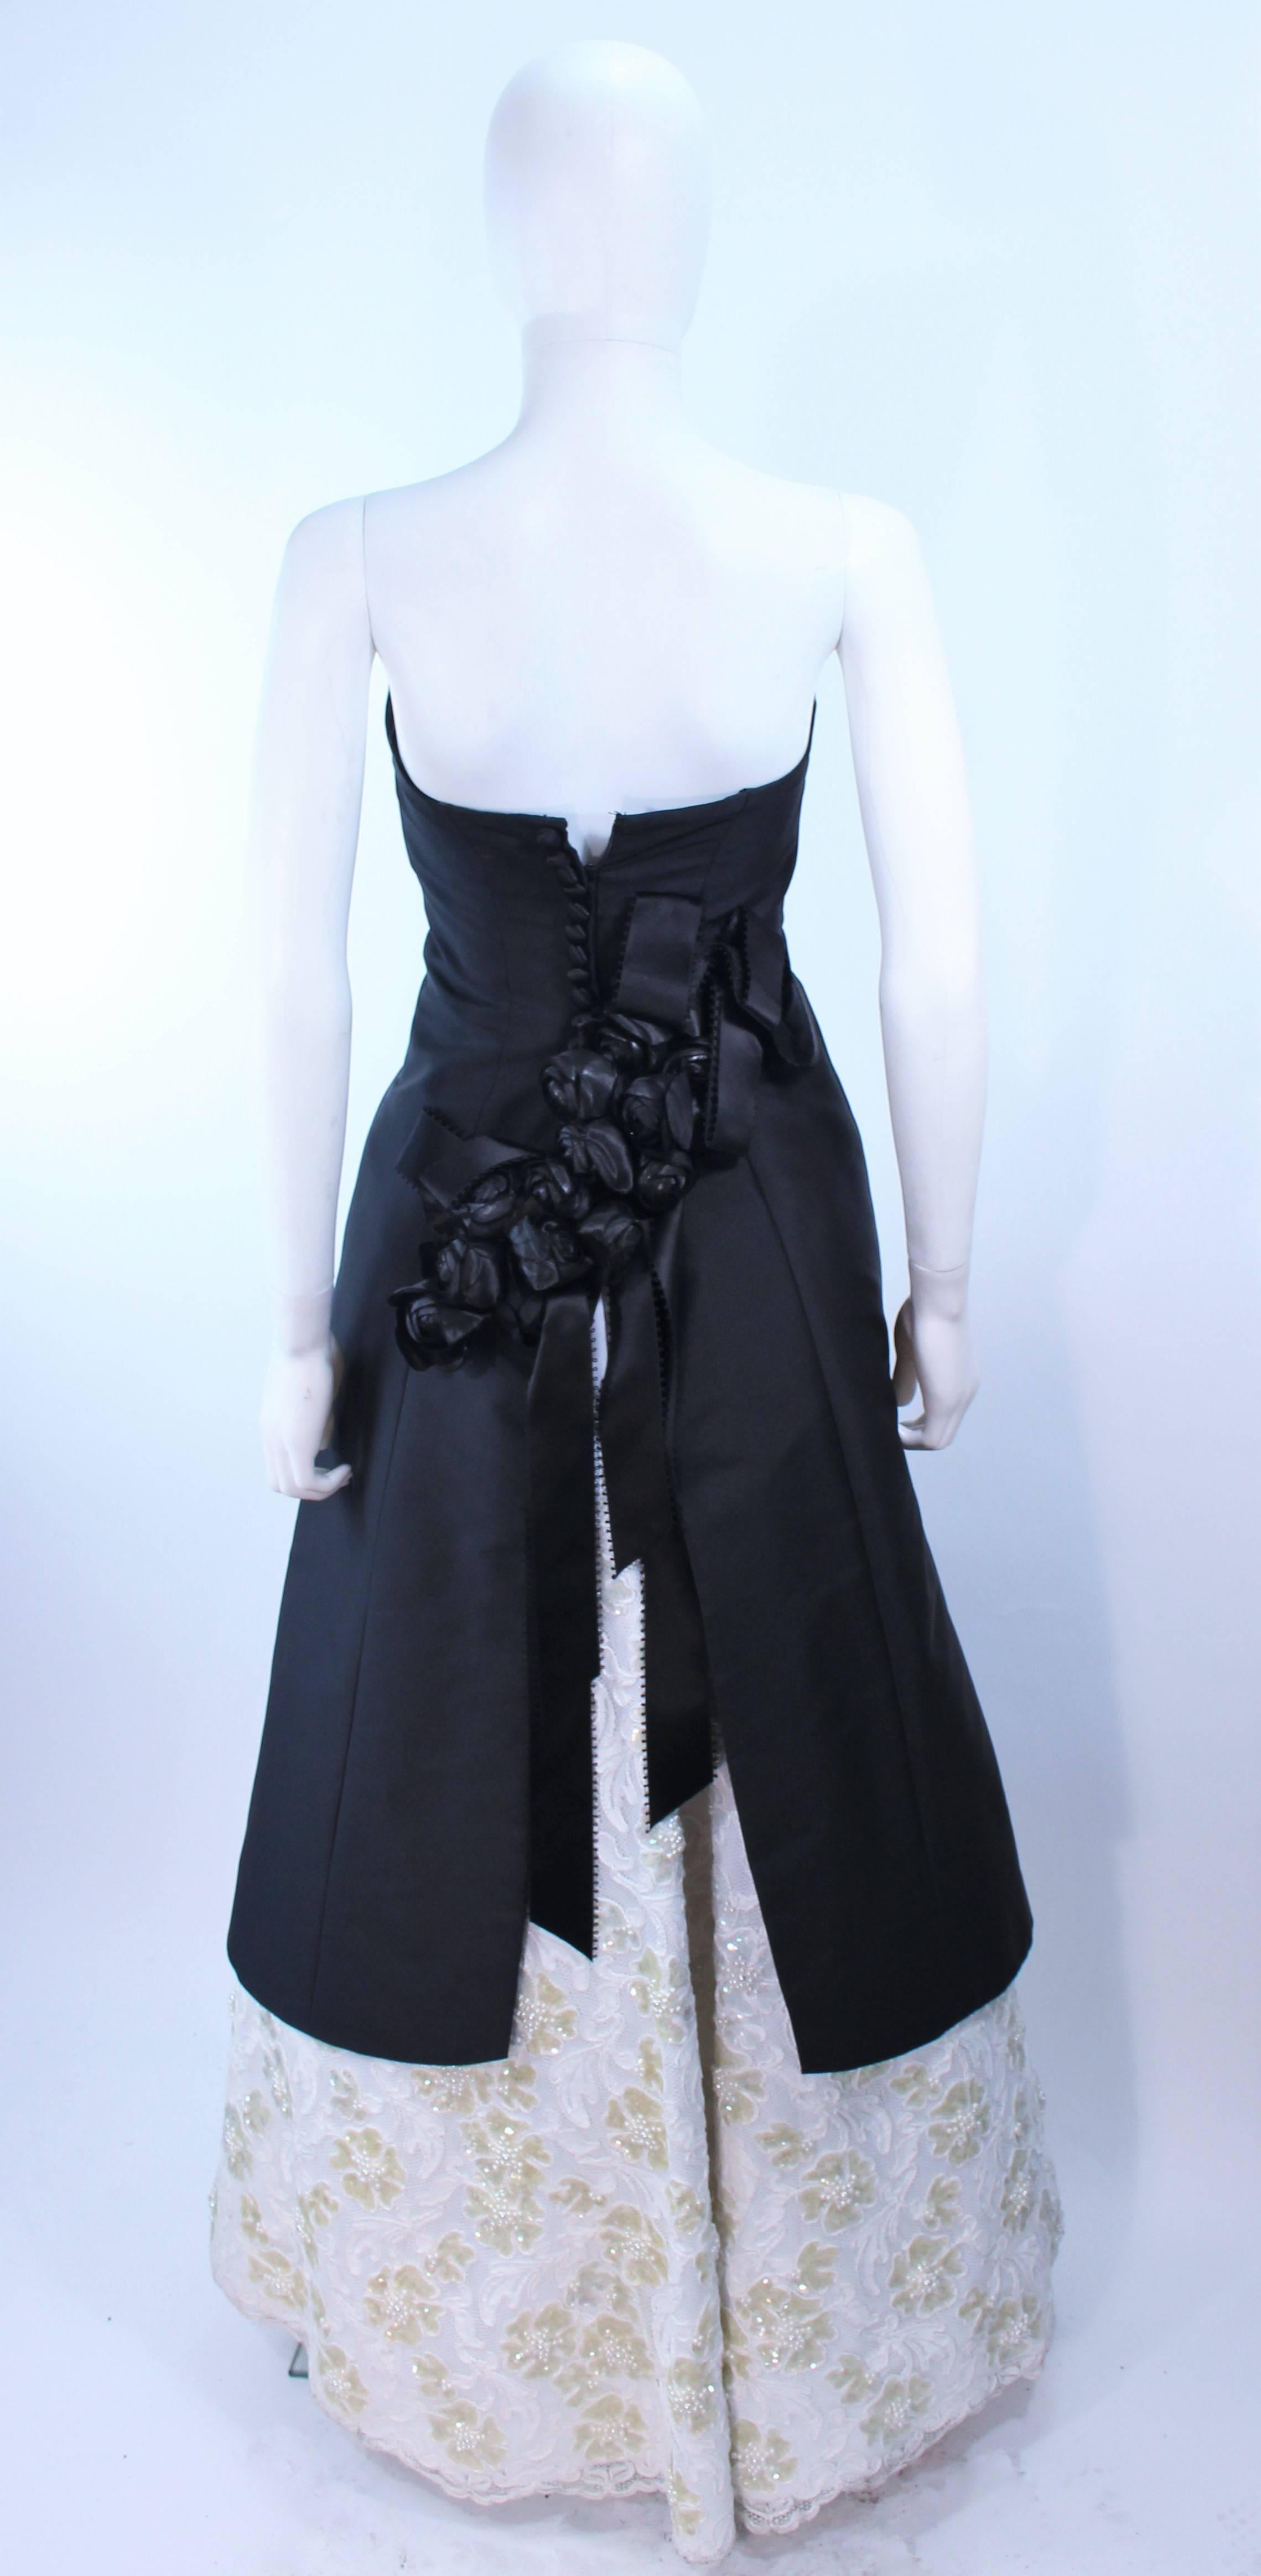 SAM CARLIN Black Silk Gown with White Sequin Lace Accents Size 6 For Sale 1